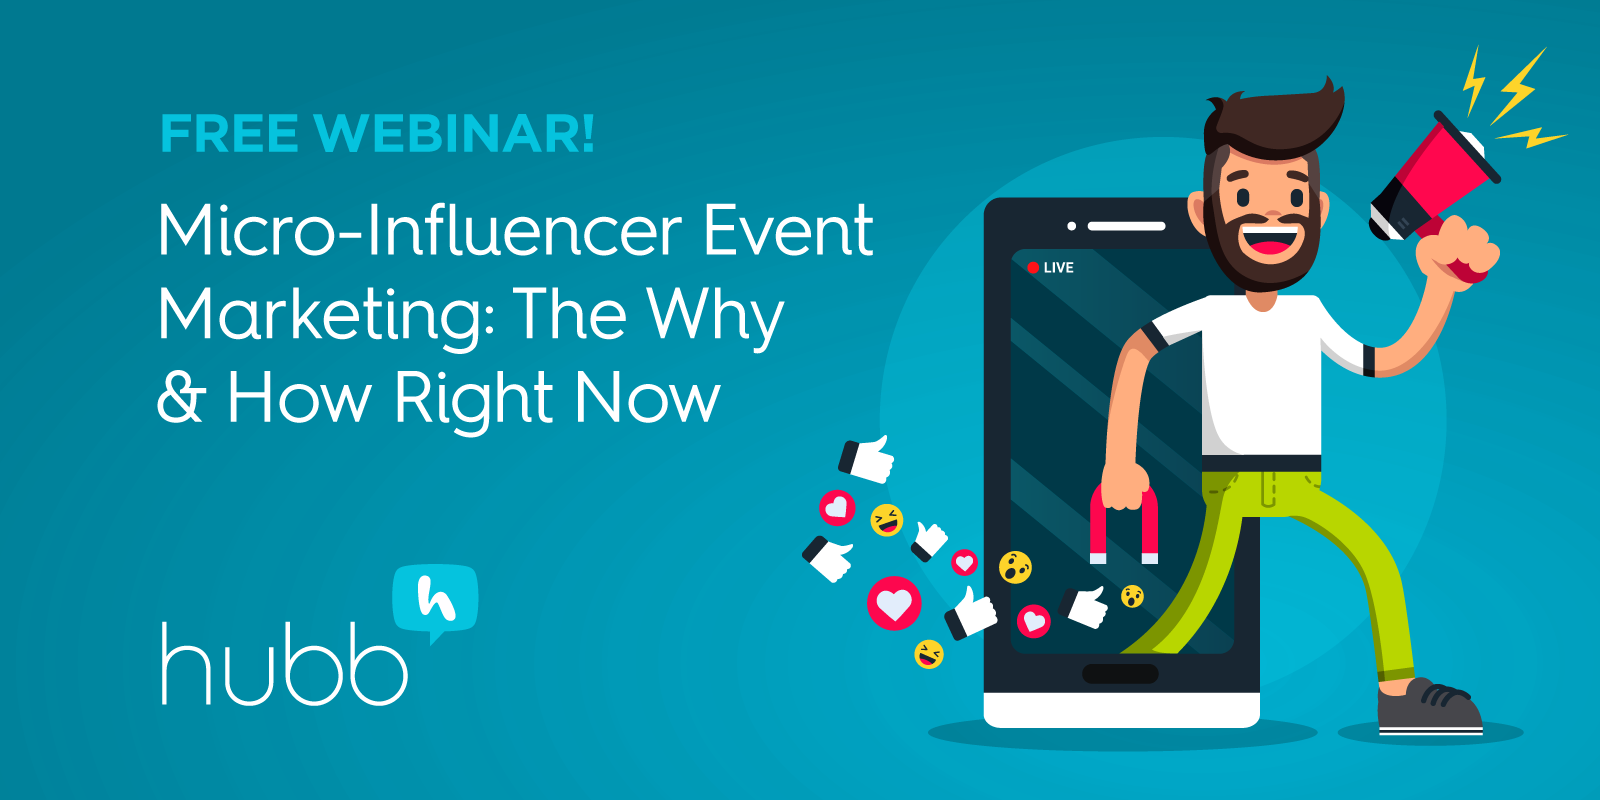 [Webinar] Micro-Influencer Event Marketing: The Why & How Right Now